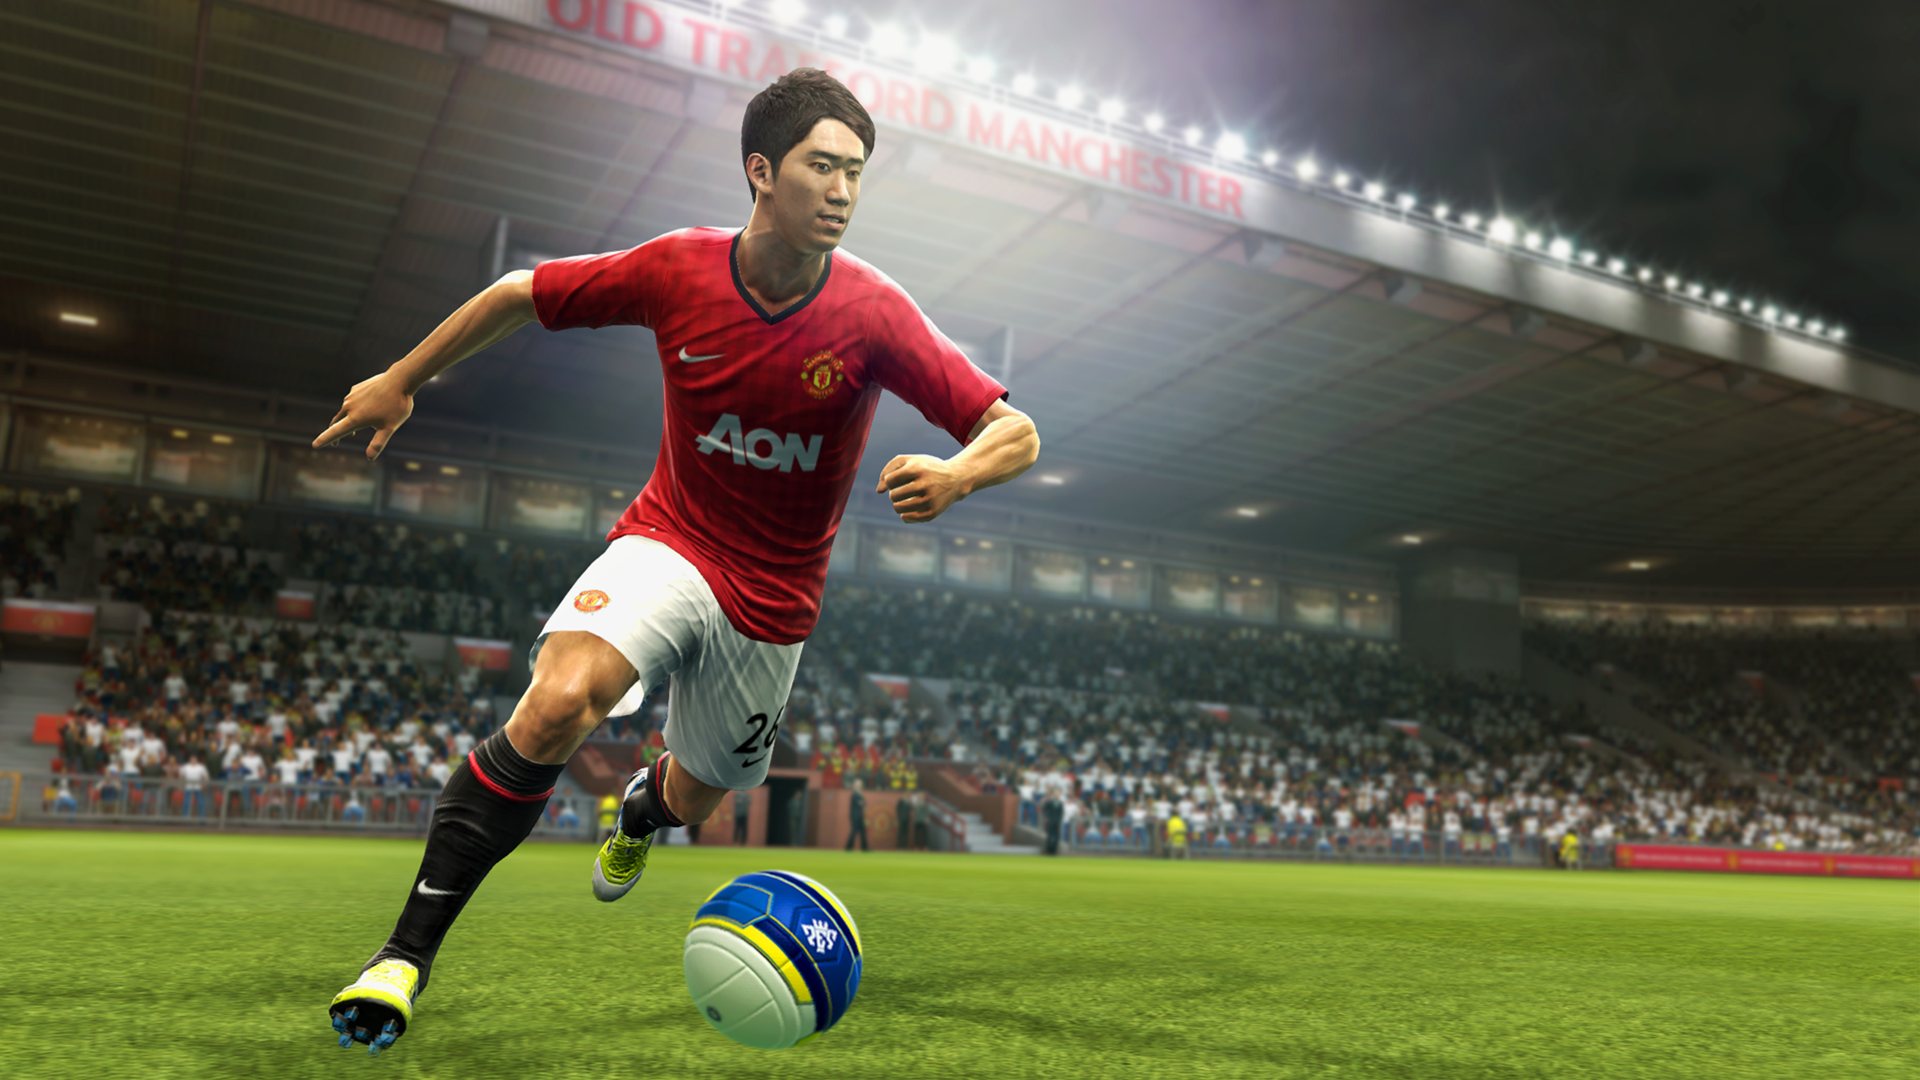 The players win the game. Pro Evolution Soccer 2013. Pro Evolution Soccer 2013 для компьютера. Winning Eleven. PLAYSTATION PES 2013.